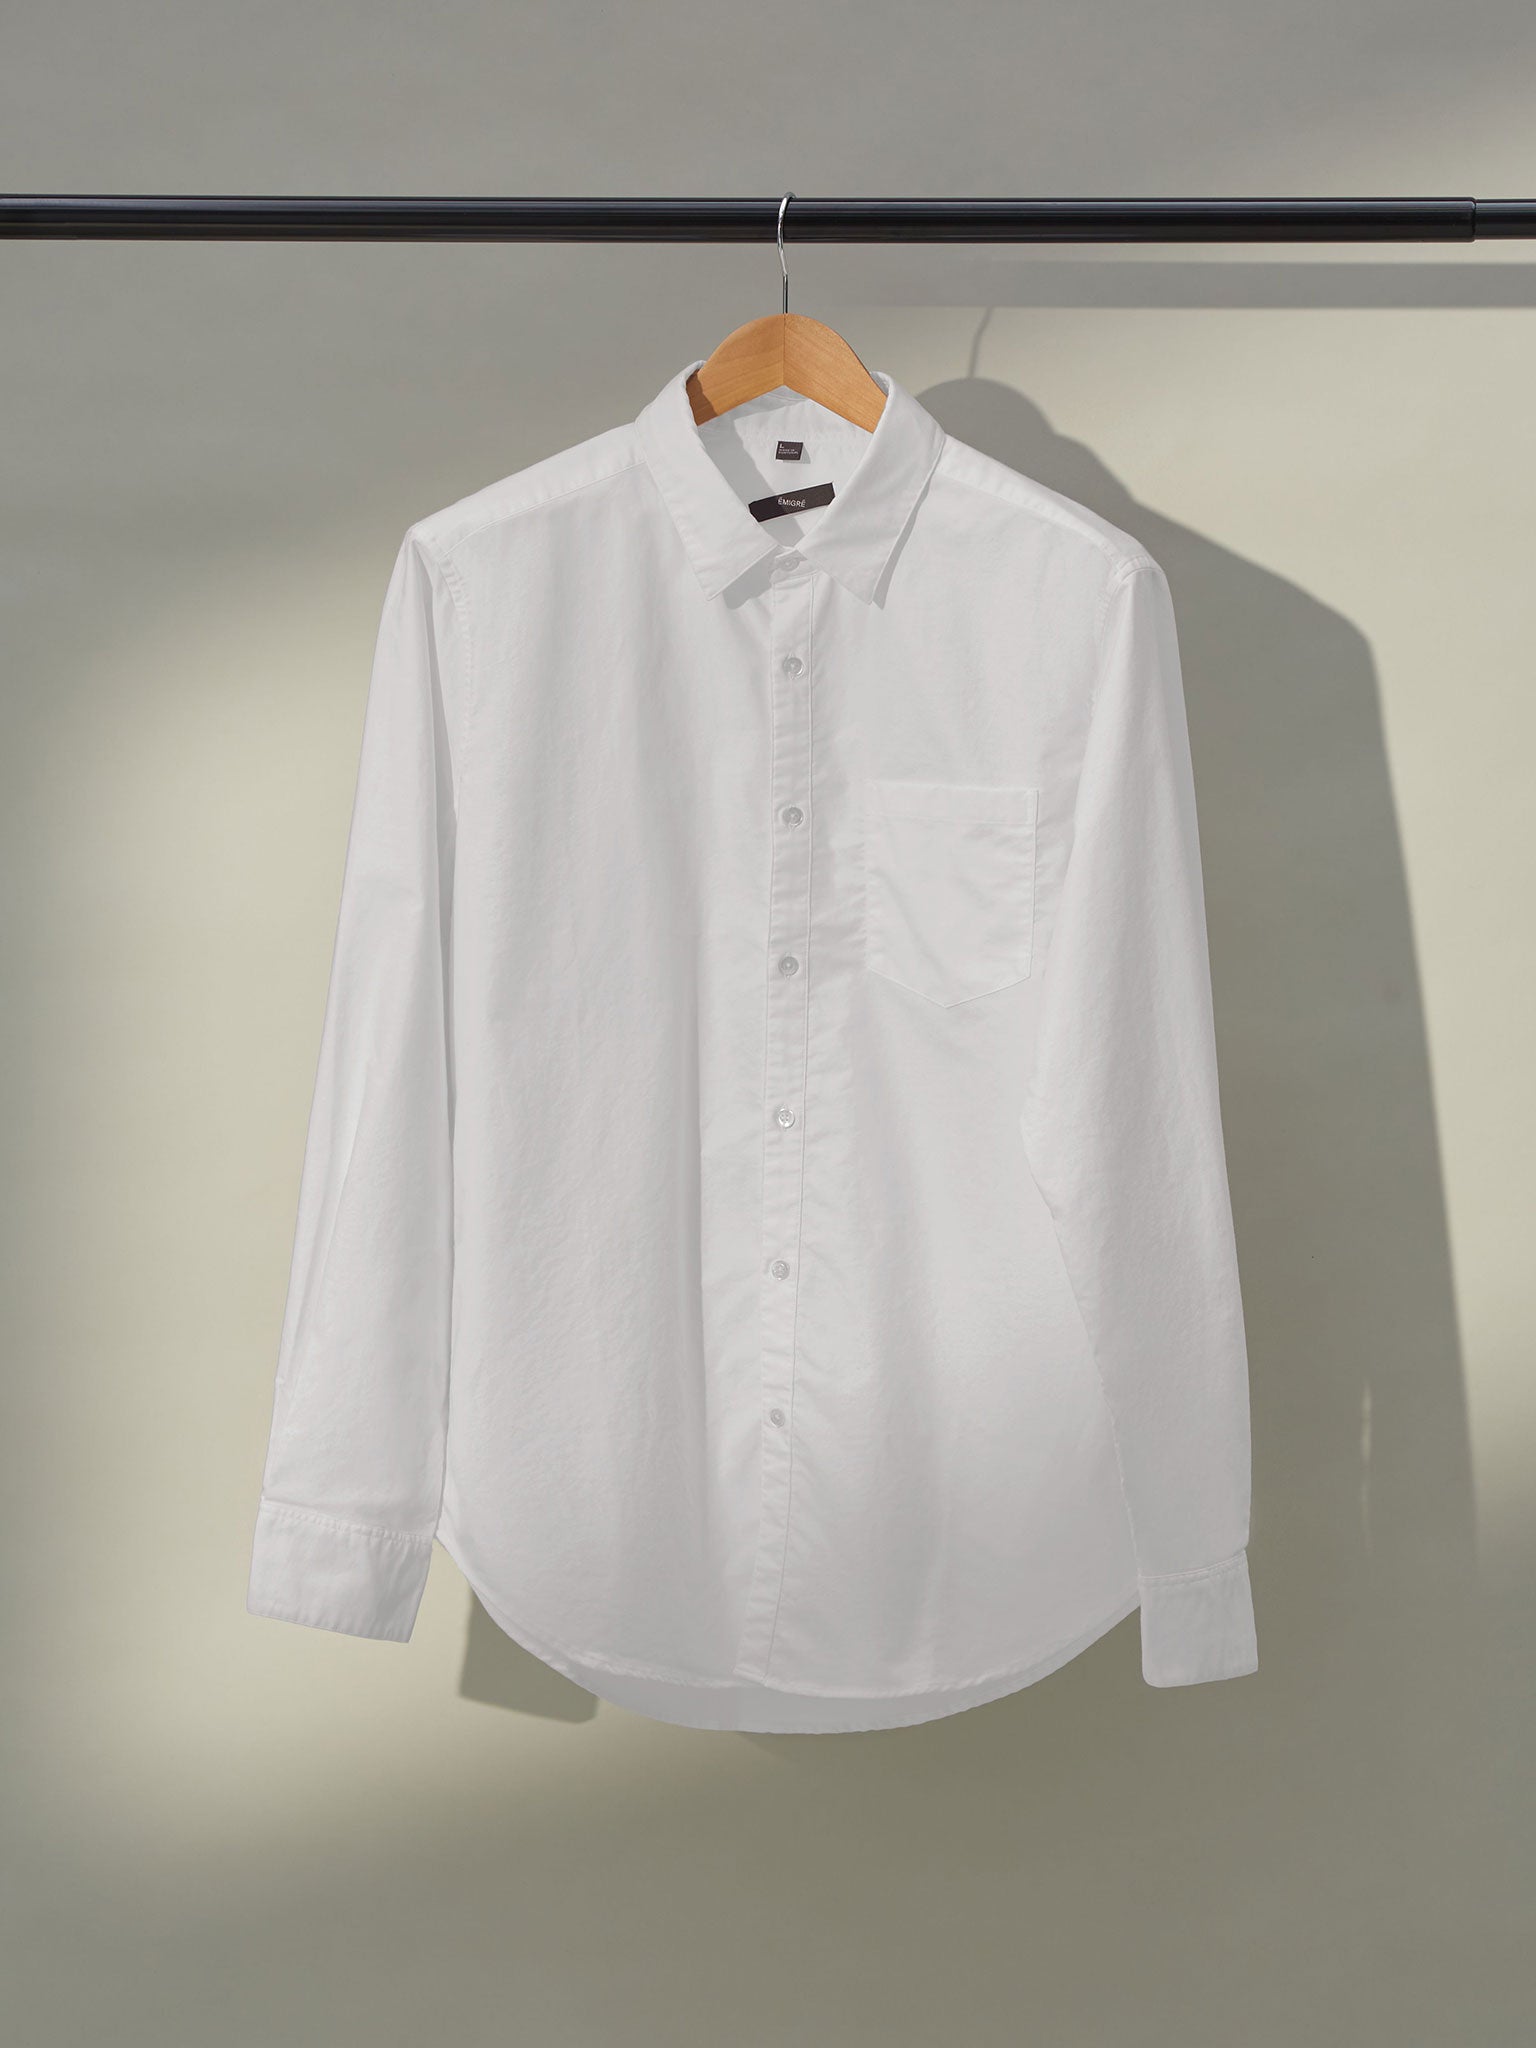 mens travel button down shirts with front pocket - perfect for travel